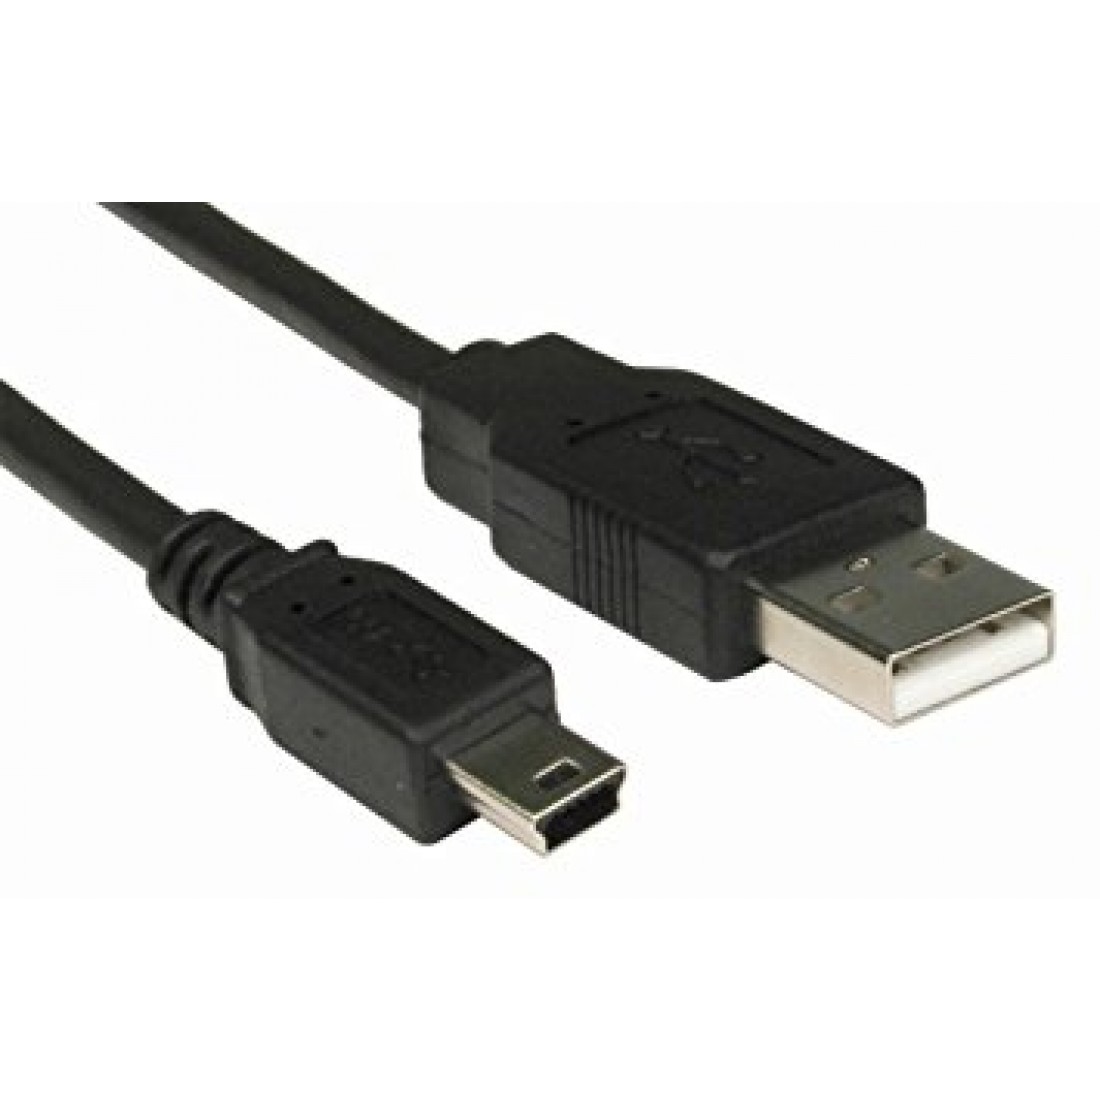 0.9 inch USB MALE TO MINI B 2.0 OTG CABLE